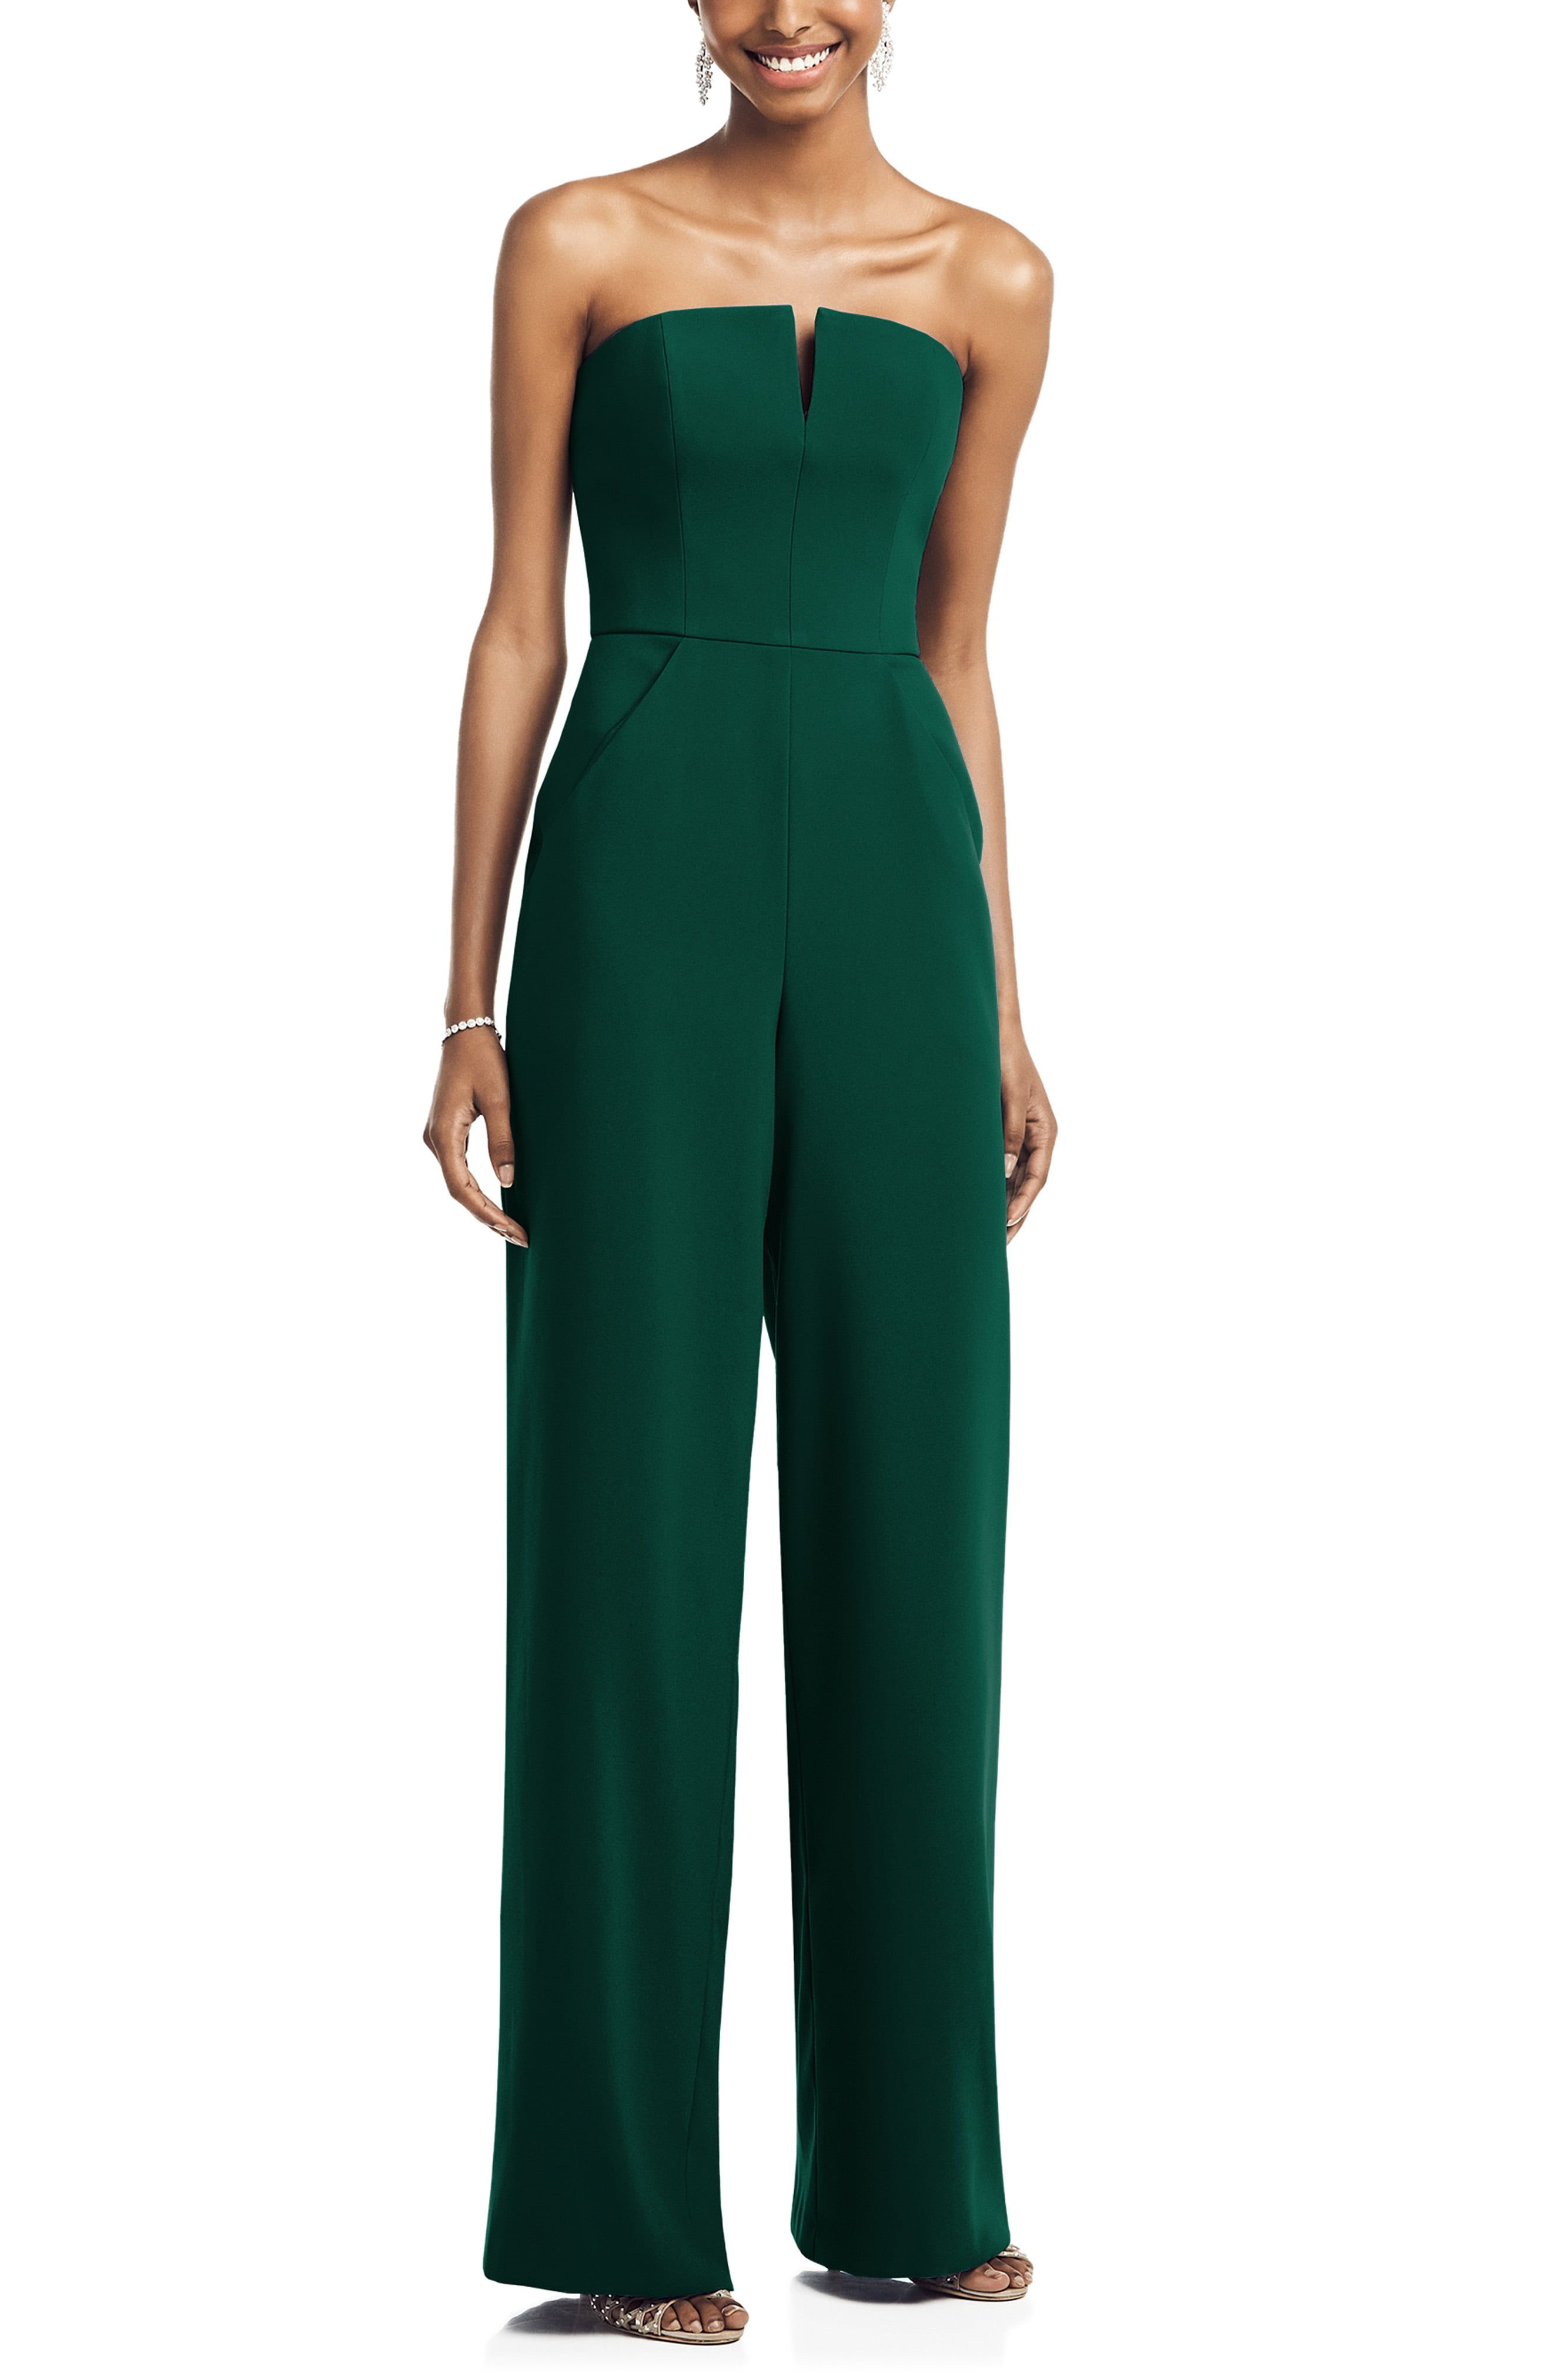 jumpsuits to wear to a summer wedding